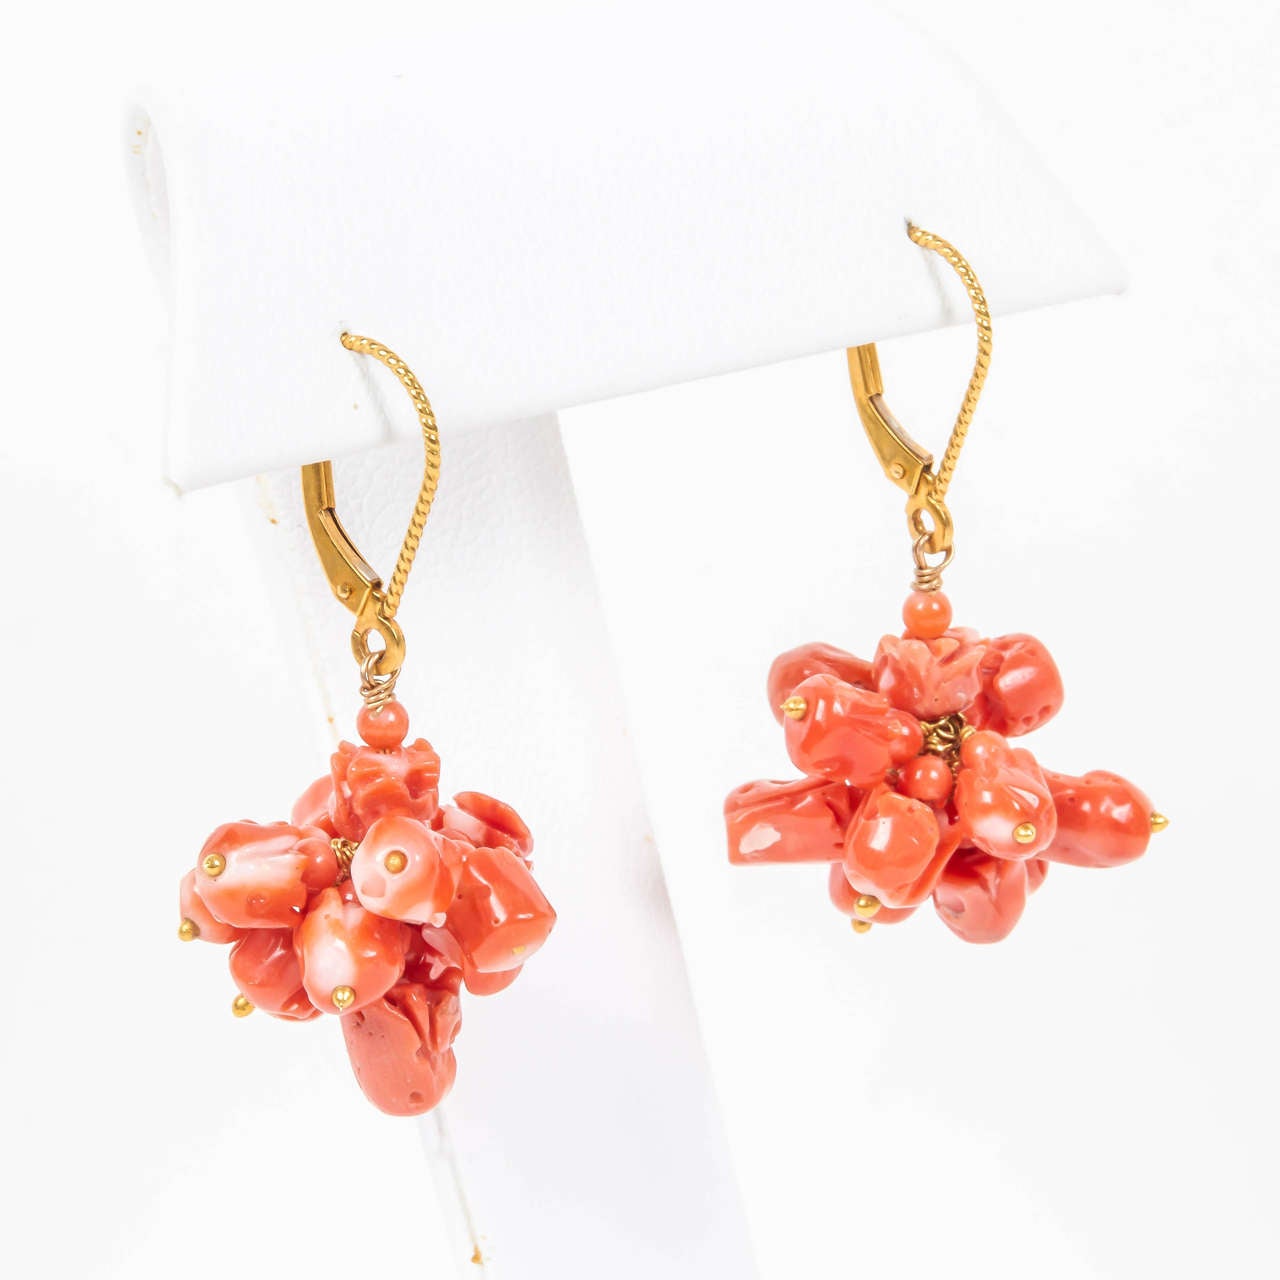 Natural coral tulips are suspended from 14kt euro wires for extra security. The charming cluster of coral tulips dangles gracefully from your ear. The matching necklace is J150319696124